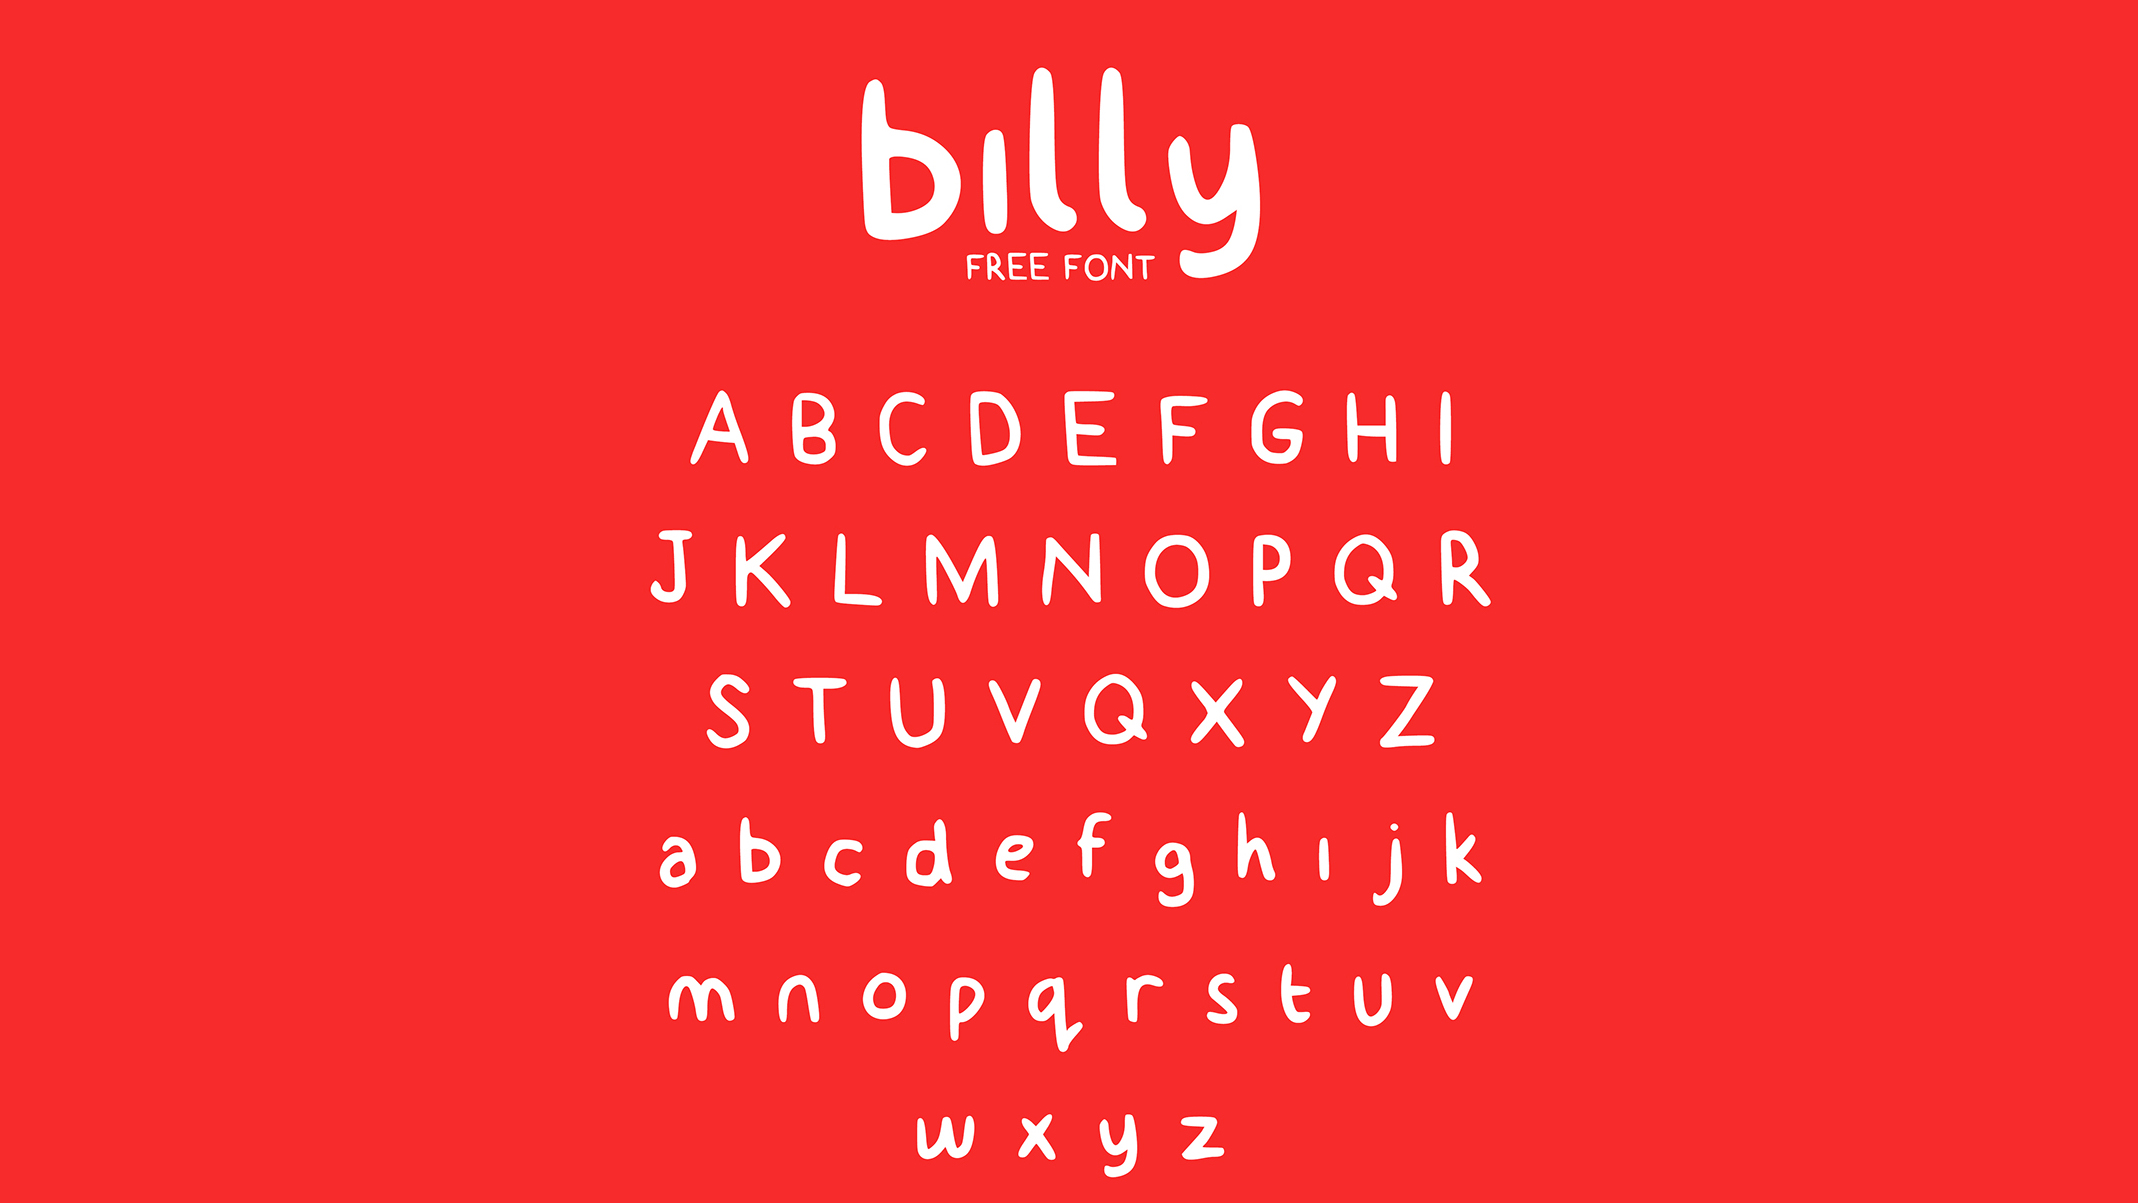 Best free handwriting fonts: Billy